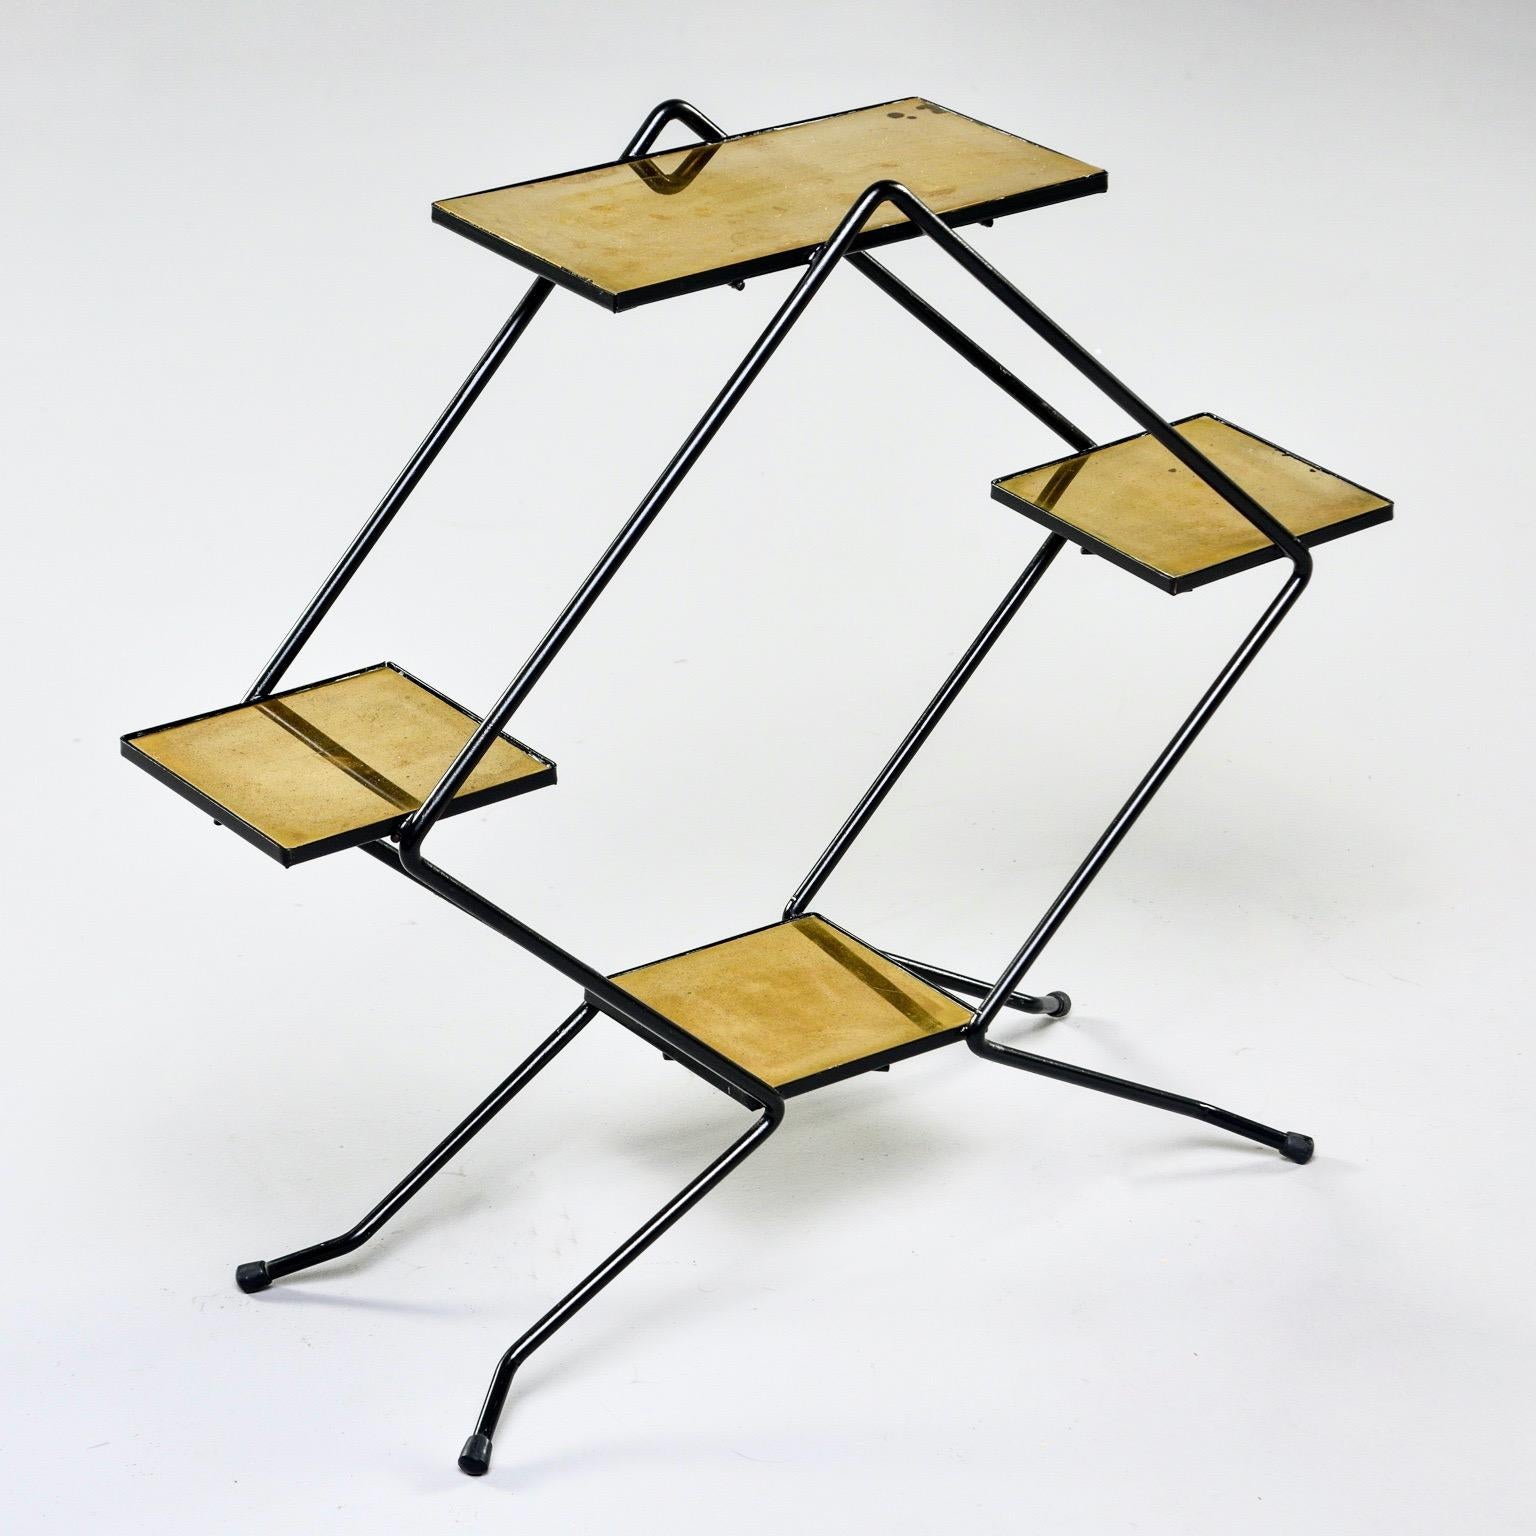 Italian display stand features a footed frame of slender black iron in an open diamond shape with four brass shelves, circa late 1950s-early 1960s. This can be used as a plant stand or on top of a larger table to display art and other objects.